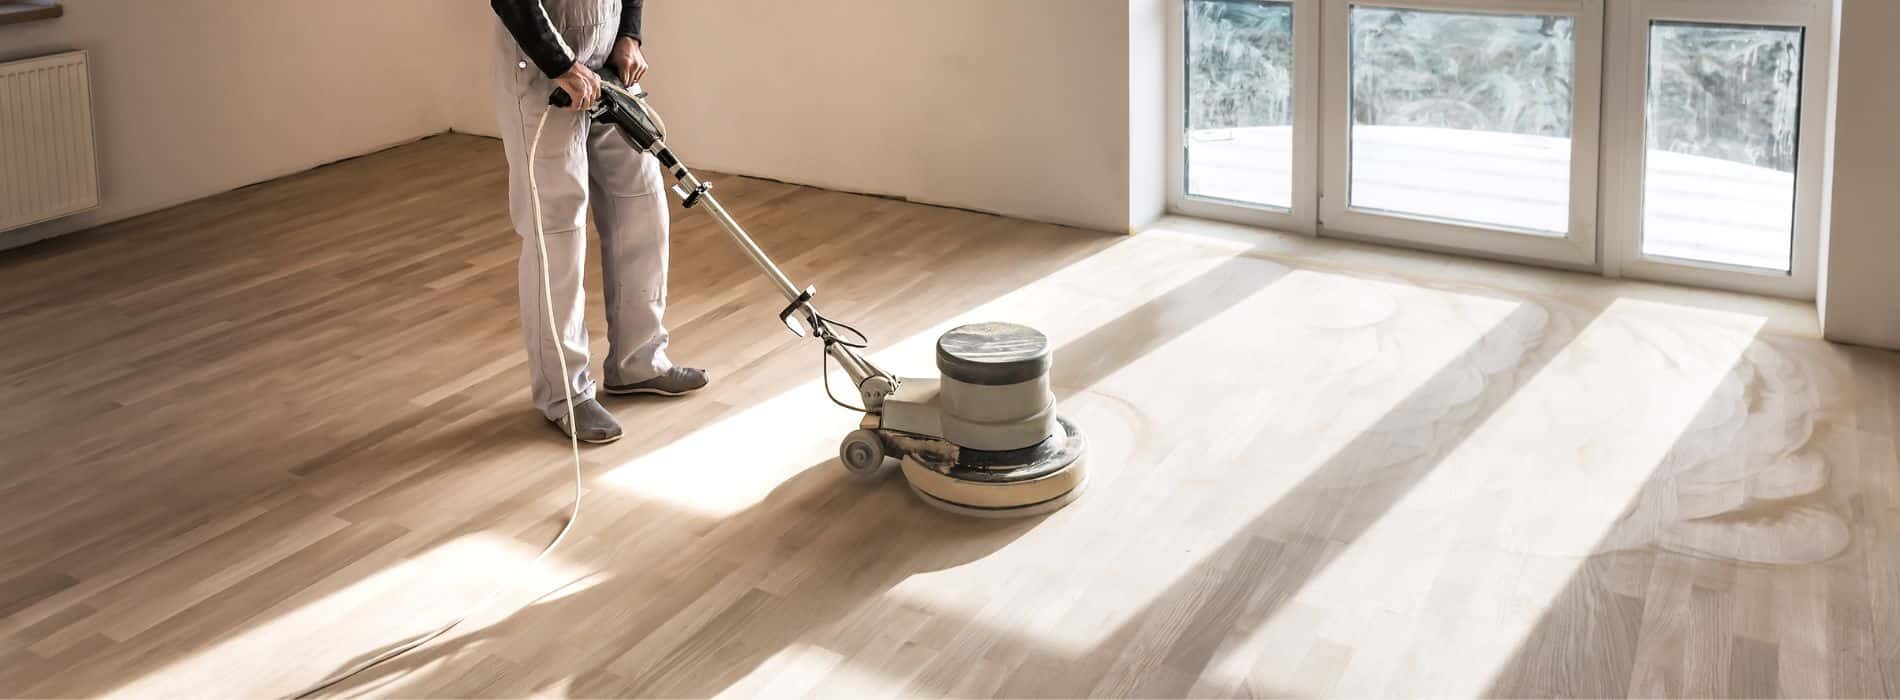 Mr Sander® sanding a floor with a Bona FlexiSand 1.9 sander, a powerful tool with a dimension of 407 mm and delivering an impressive 1.9 kW of effect. Operating at a voltage of 230 V and a frequency of 50 Hz/60 Hz, this versatile sander is equipped with various drive plates, catering to different tasks like bare wood sanding, fine sanding, oiling, and concrete grinding. To ensure cleanliness and efficiency, the sander is connected to a dust extraction system that incorporates a HEPA filter. This combination not only provides a thorough and professional sanding experience but also ensures a clean and healthy environment. With their expertise and state-of-the-art equipment, Mr Sander® deliver exceptional results for herringbone floor sanding projects.